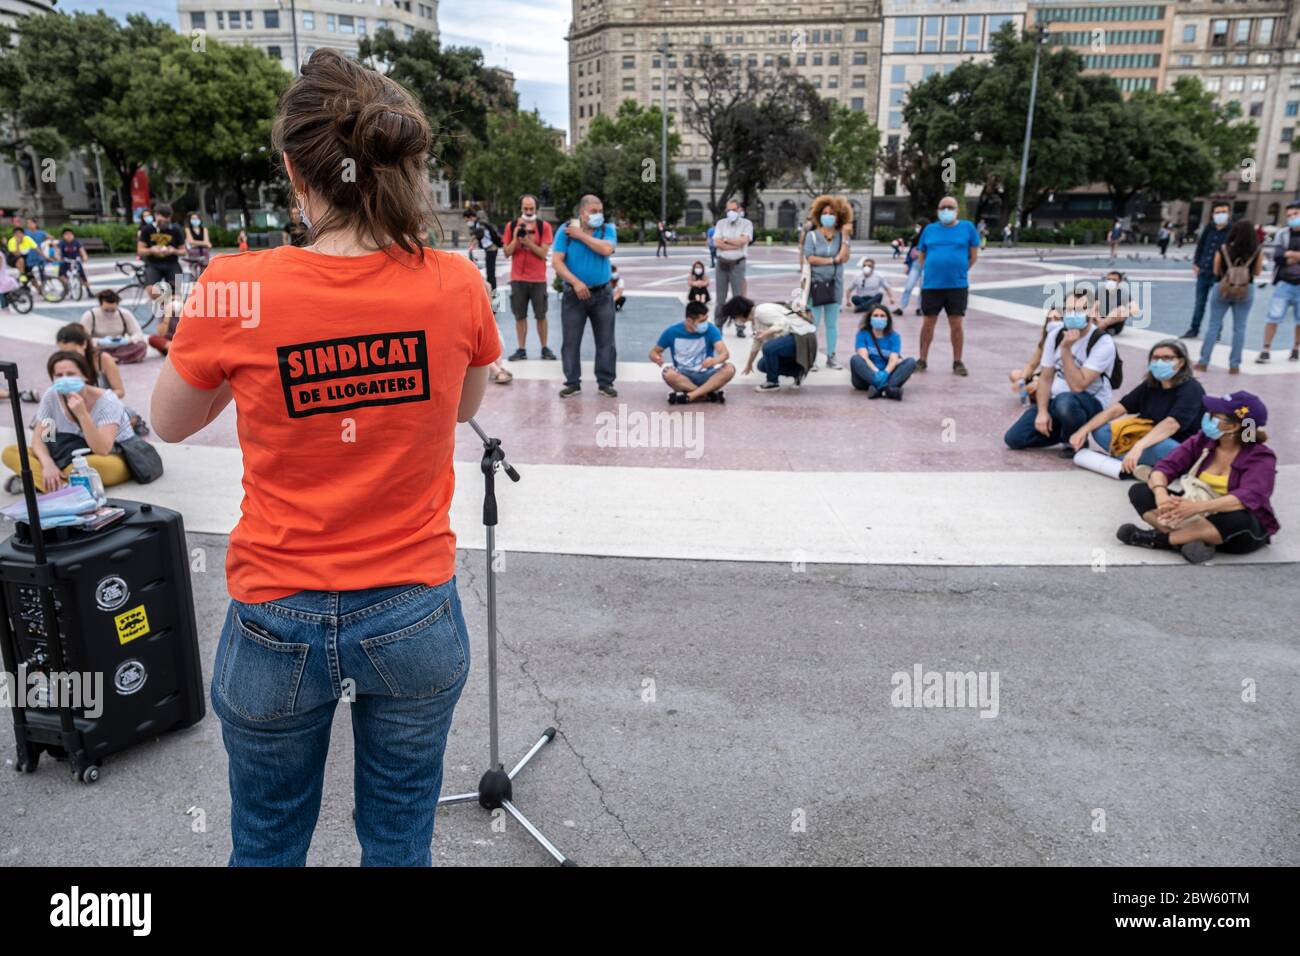 Barcelona, Spain. 29th May, 2020. A spokesperson wearing the union t-shirt during the assembly.After months of confinement, the Llogateres Union (Tenants Union) held its first public assembly at Plaza Catalunya. The primary themes of meeting were to negotiate rental prices and avoid evictions as well as getting in touch with new tenants having difficulty paying rent on their apartments. Credit: SOPA Images Limited/Alamy Live News Stock Photo